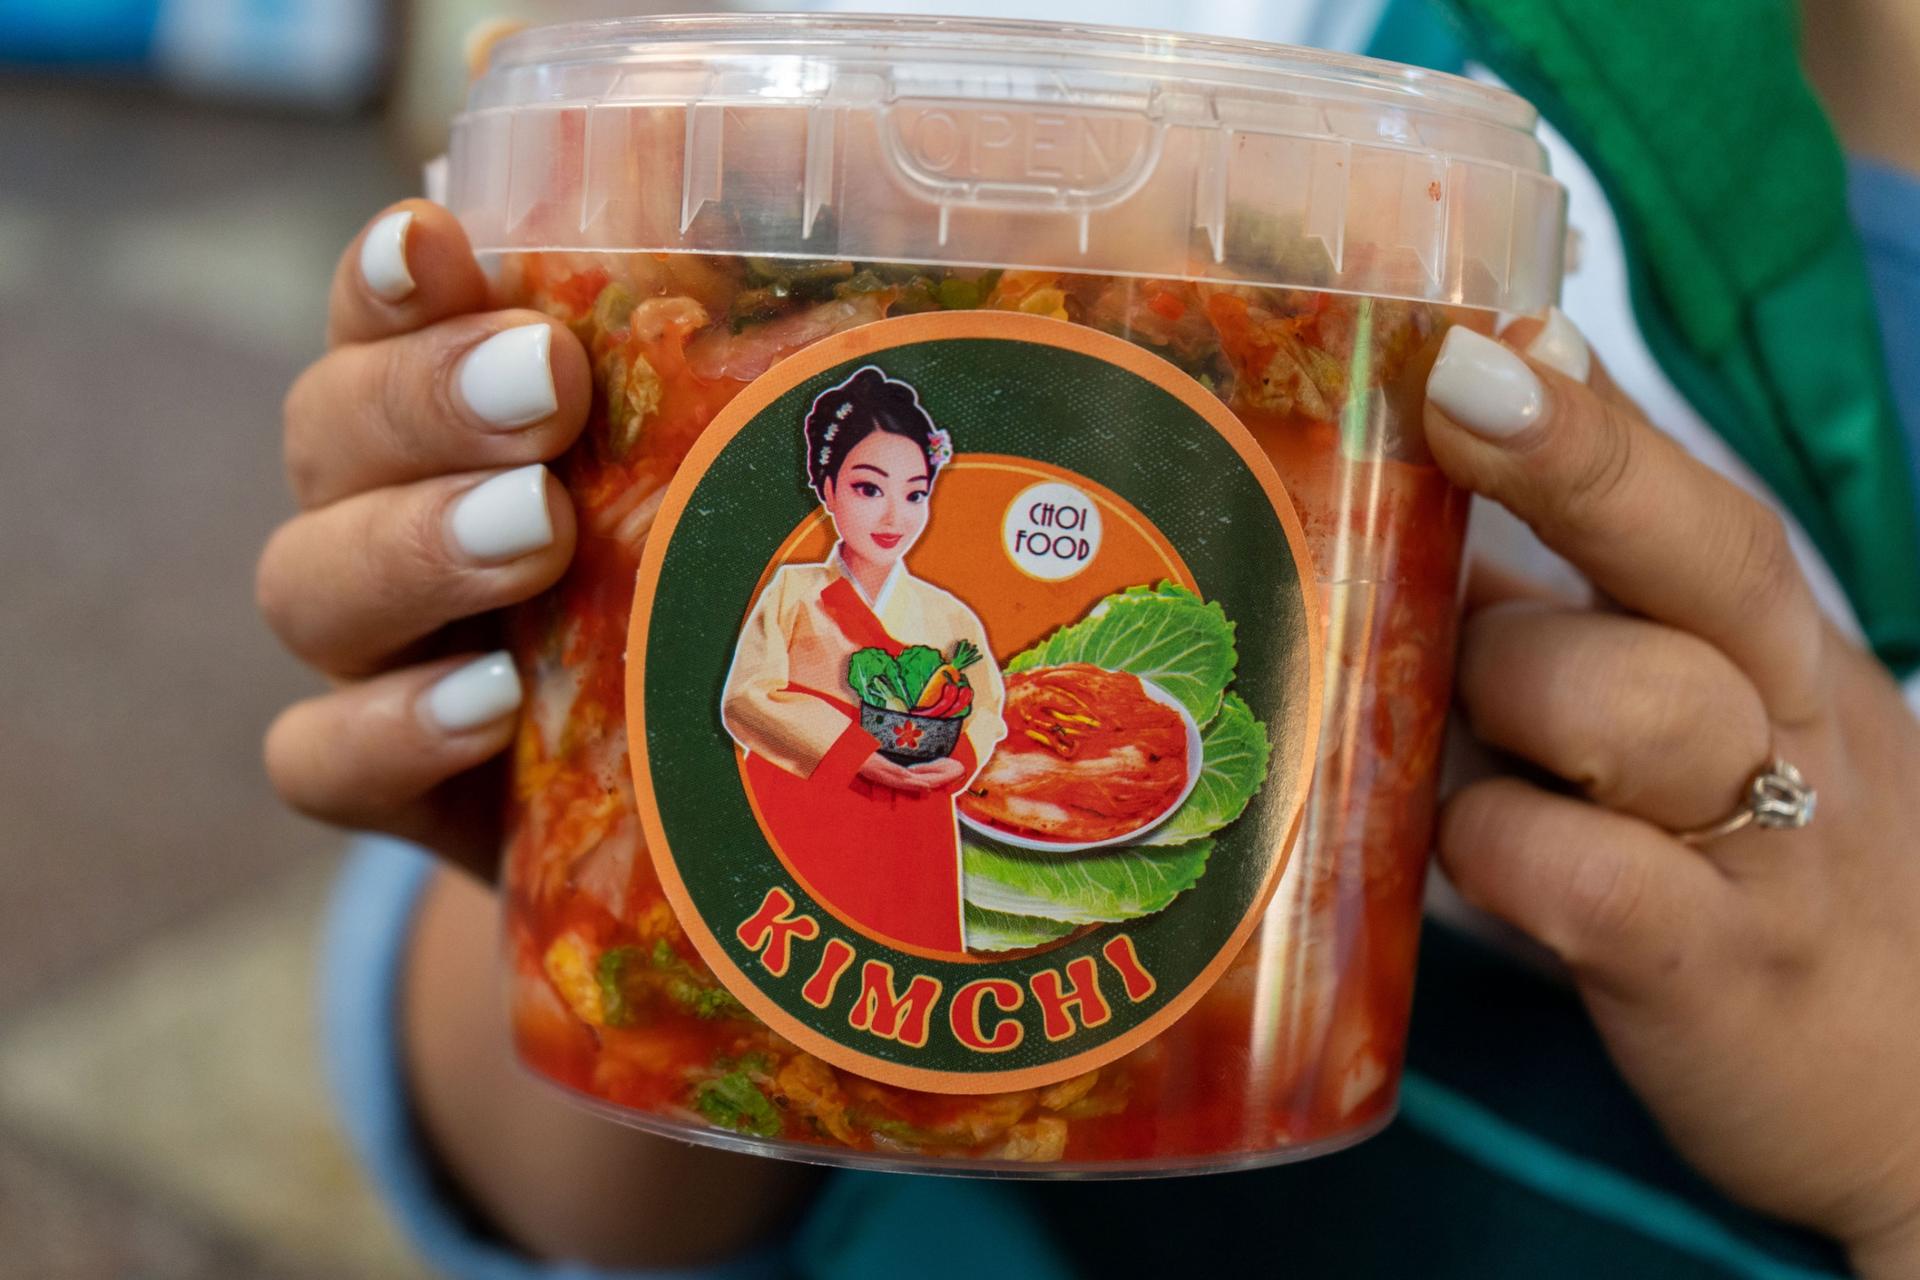 Marina Choi, 34, turned her family recipe for kimchi into Choi Food, a brand that she sells to reconnect with her heritage and share it with others.